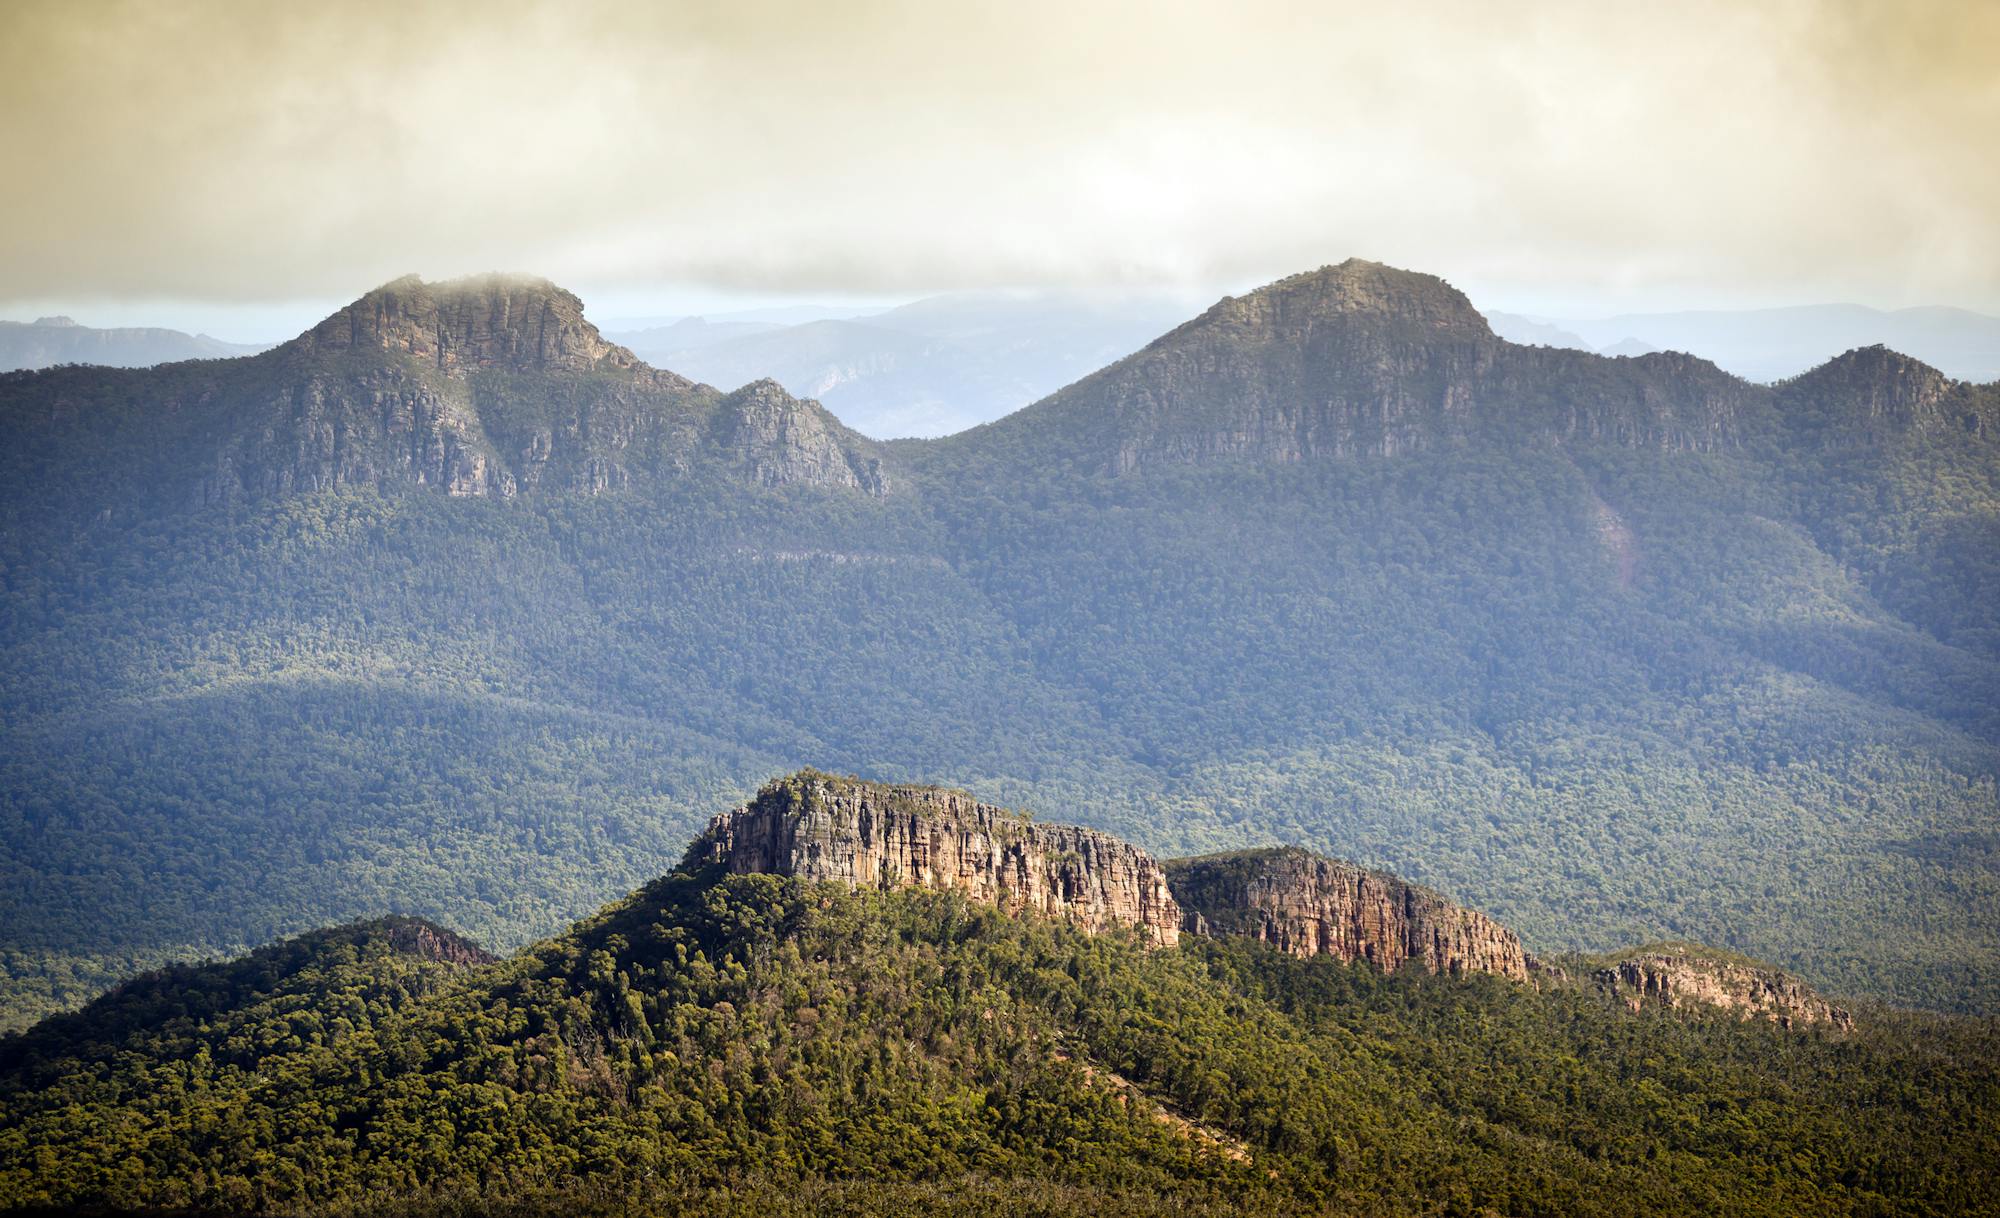 View over the Grampians National Park.